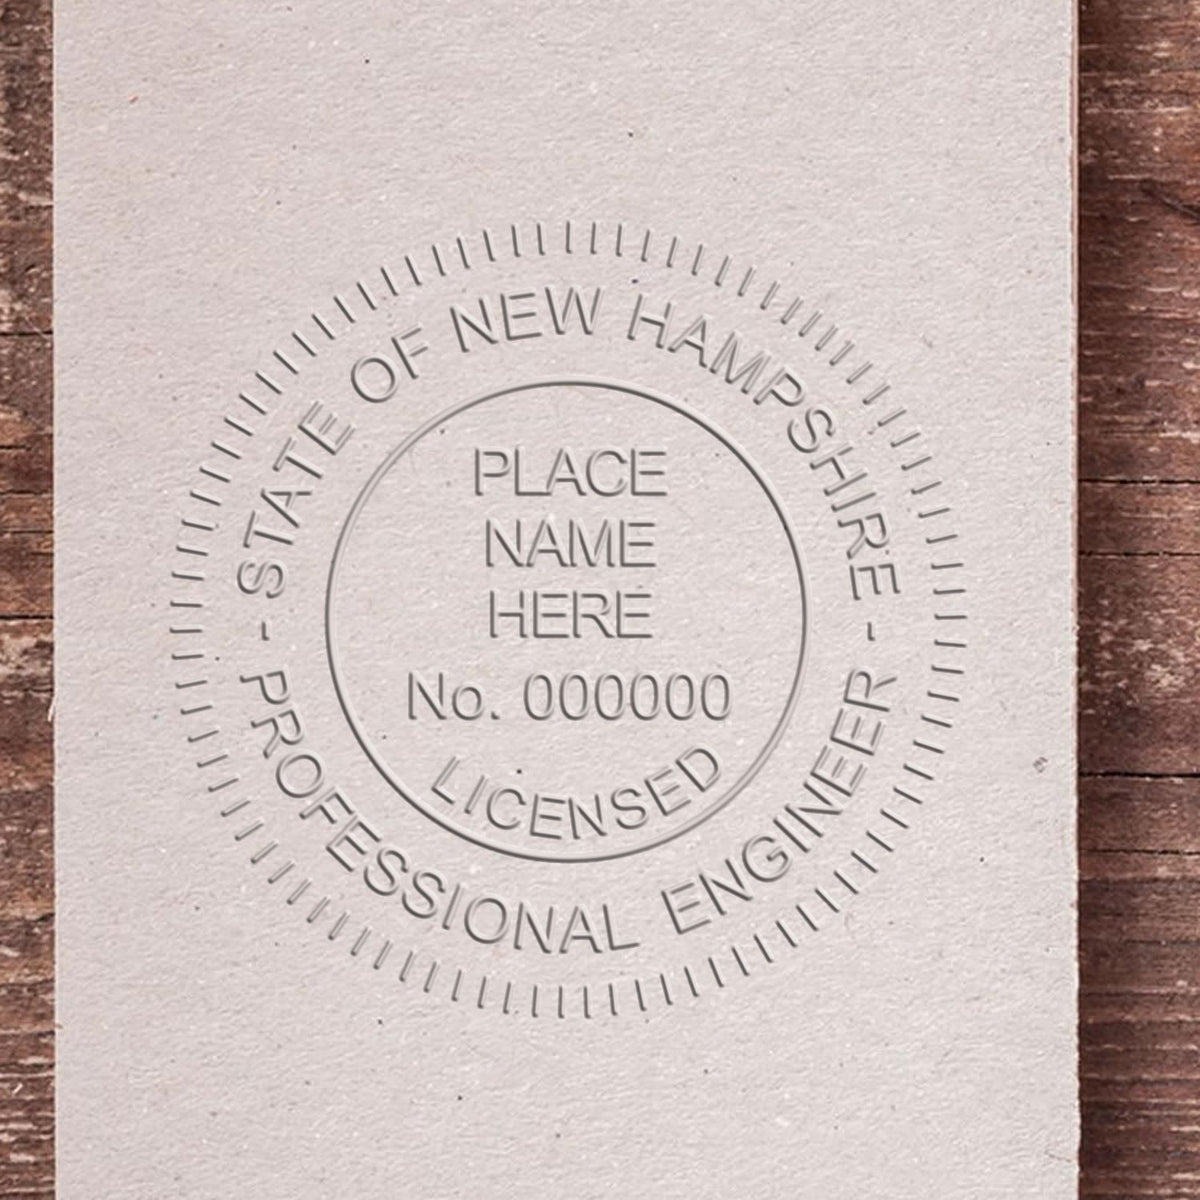 A photograph of the Long Reach New Hampshire PE Seal stamp impression reveals a vivid, professional image of the on paper.